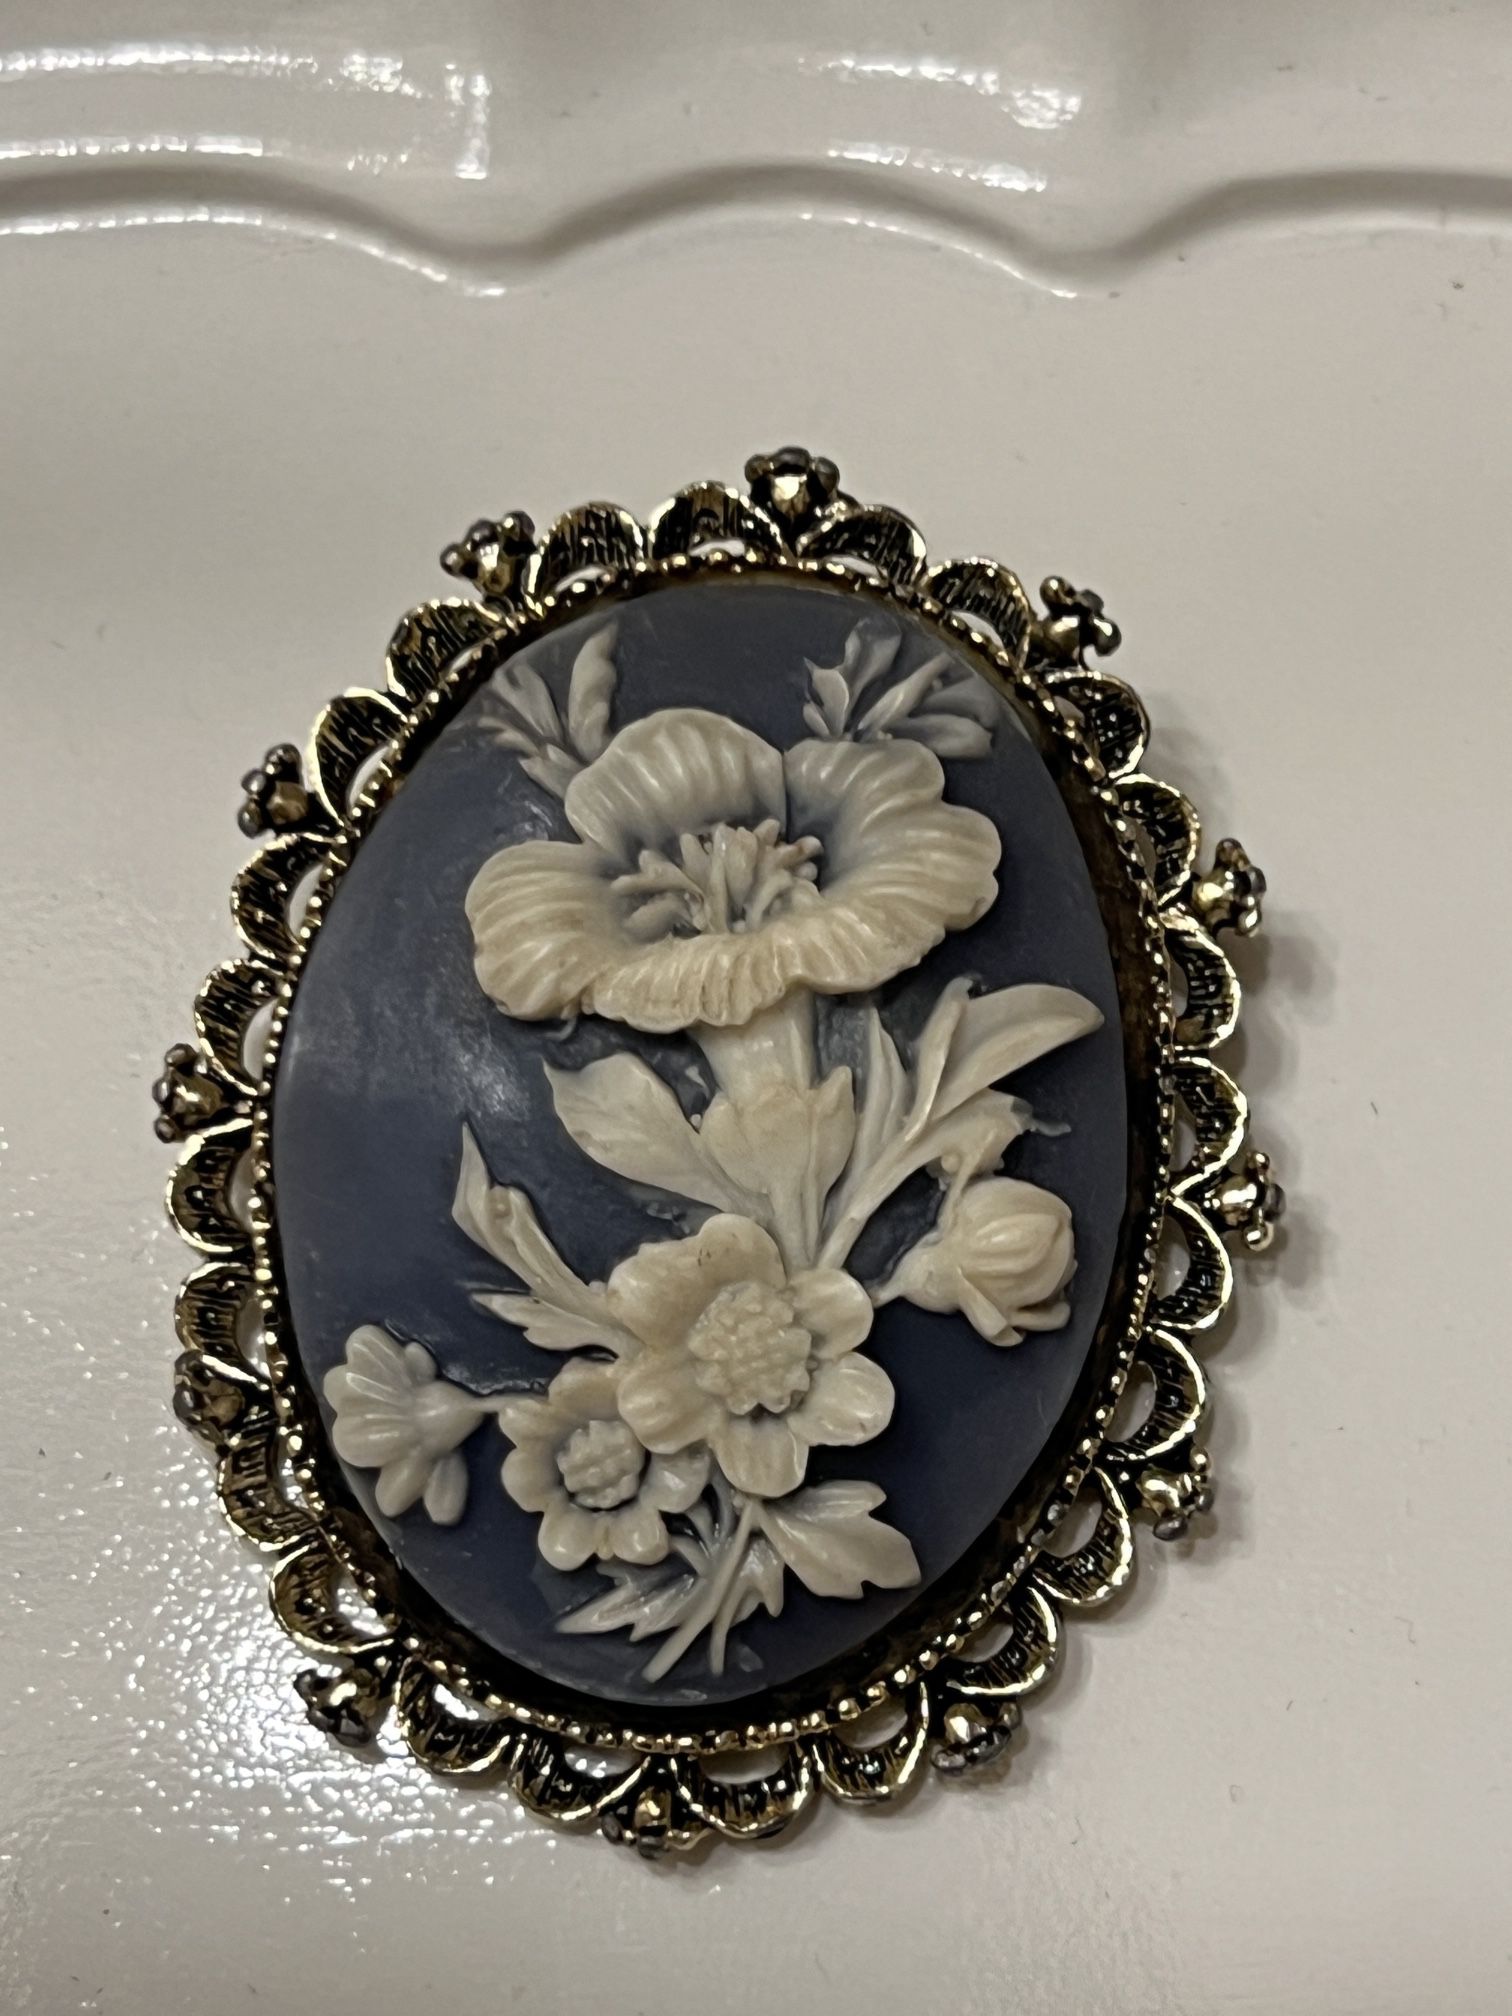 ANTIQUE VINTAGE GERRY'S WHITE FLORAL CAMEO PENDANT AND/OR BROOCH 